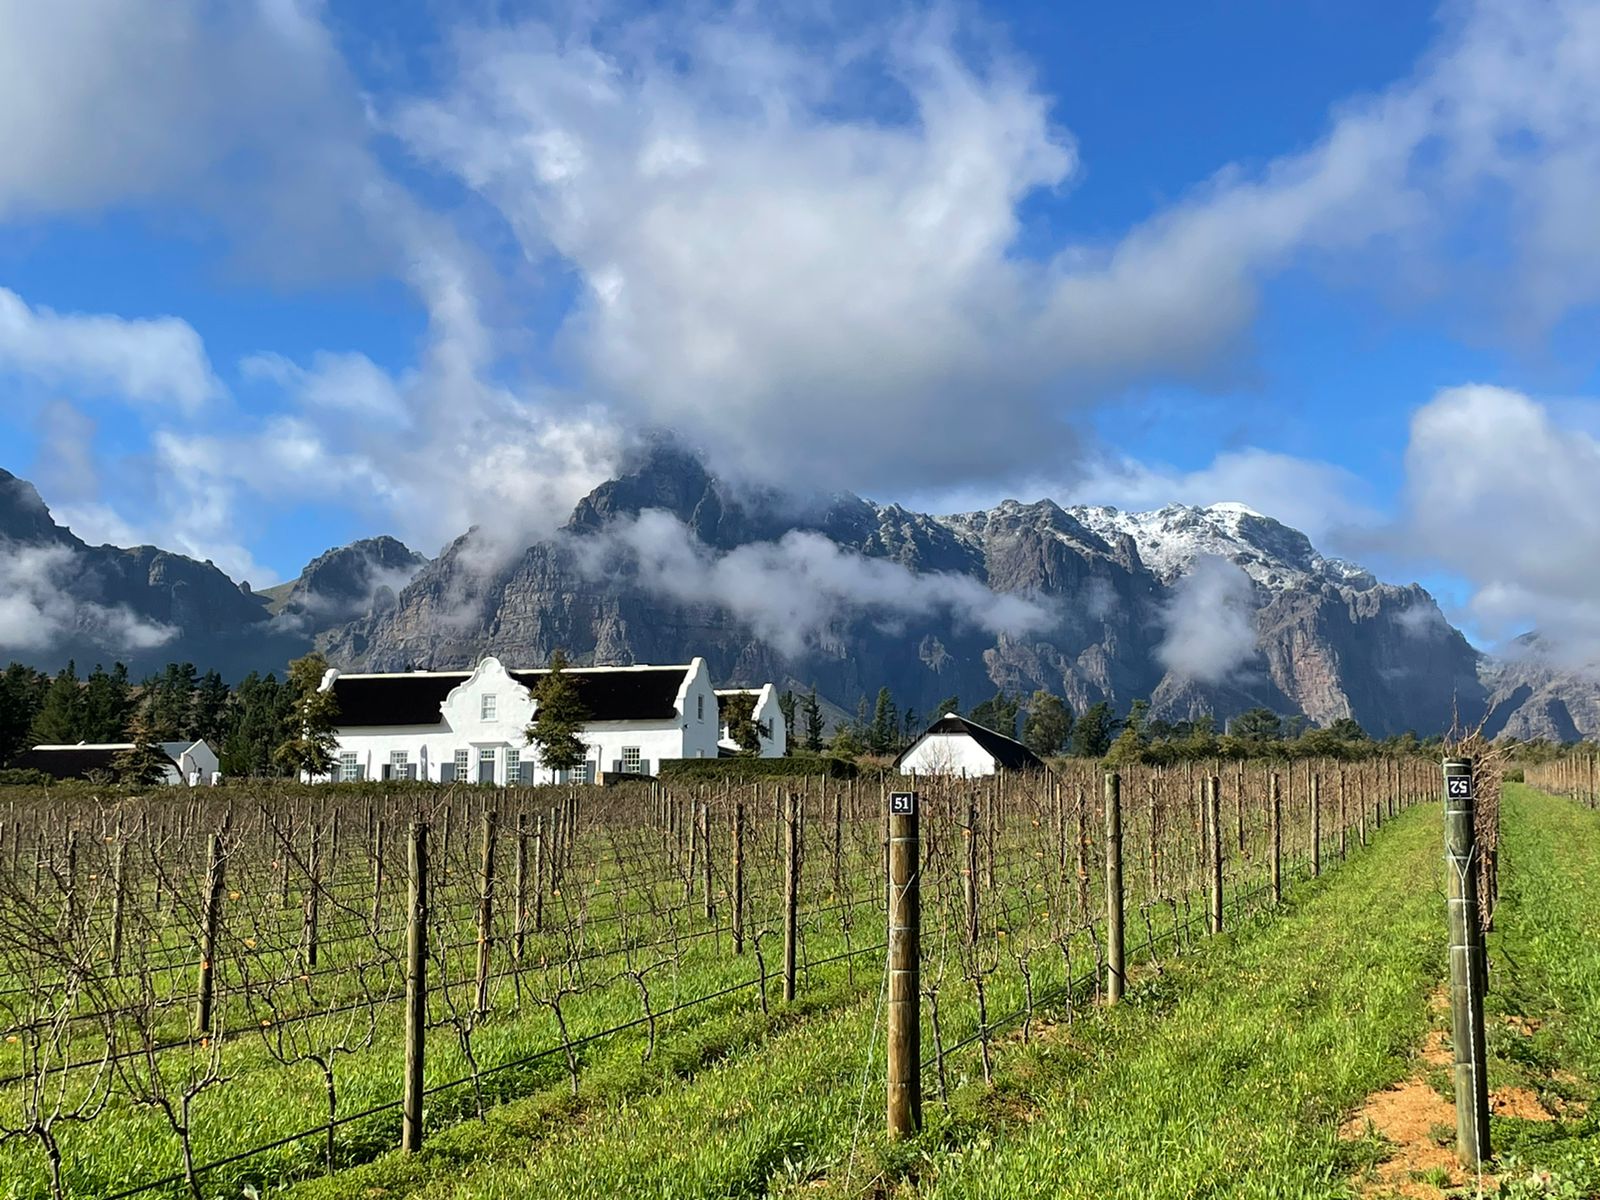 Brookdale Manor House and snow in Paarl